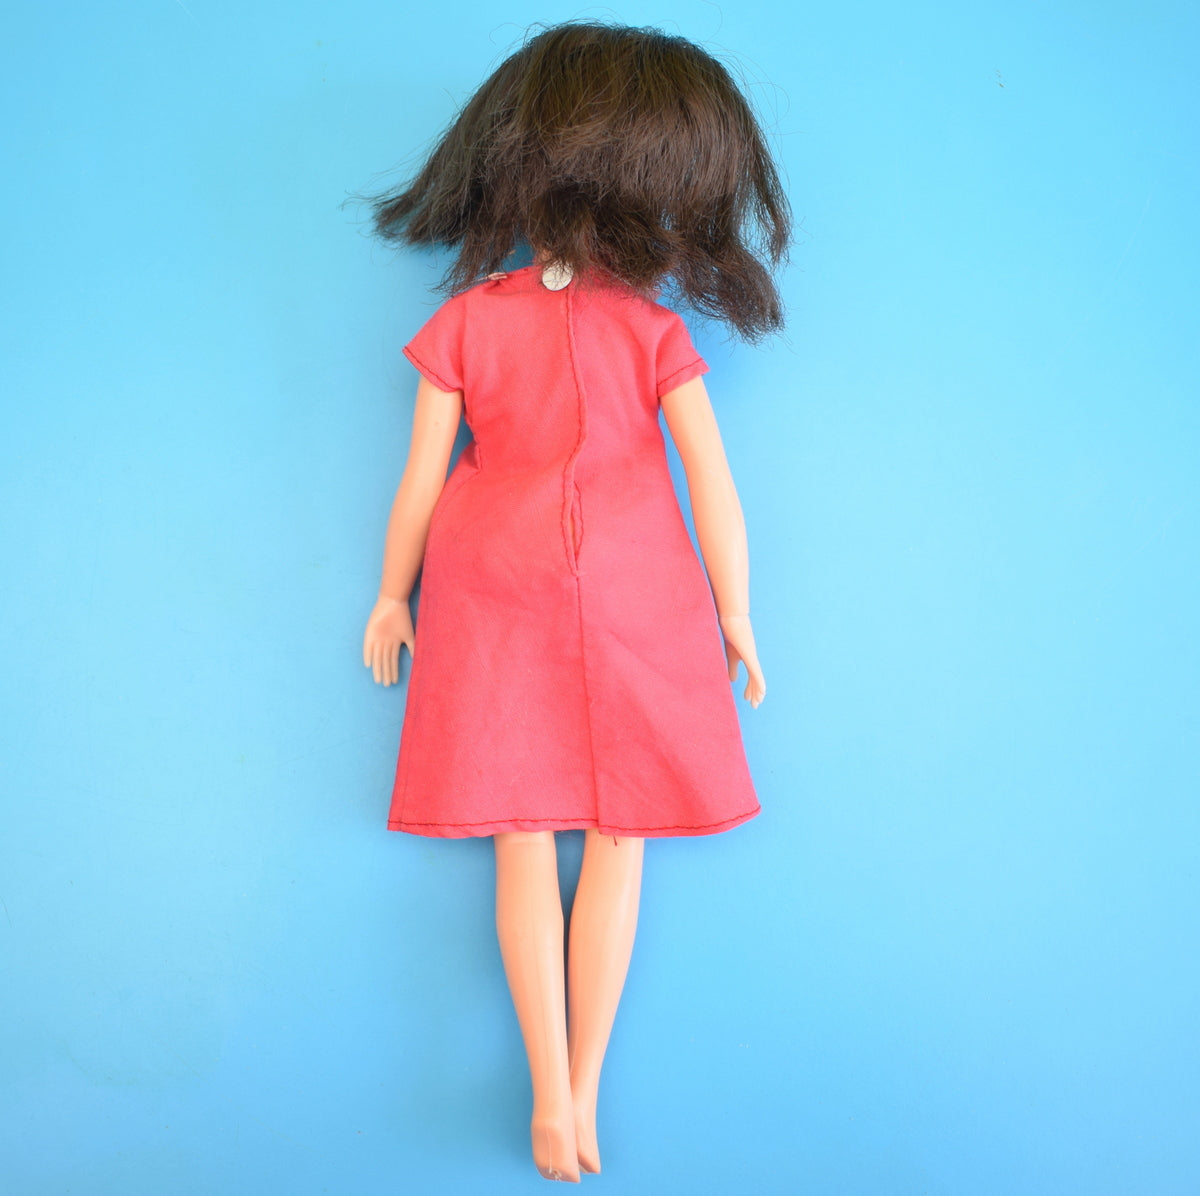 Vintage 1980s Sindy Doll - Blonde Or Brunette (With Clothes)